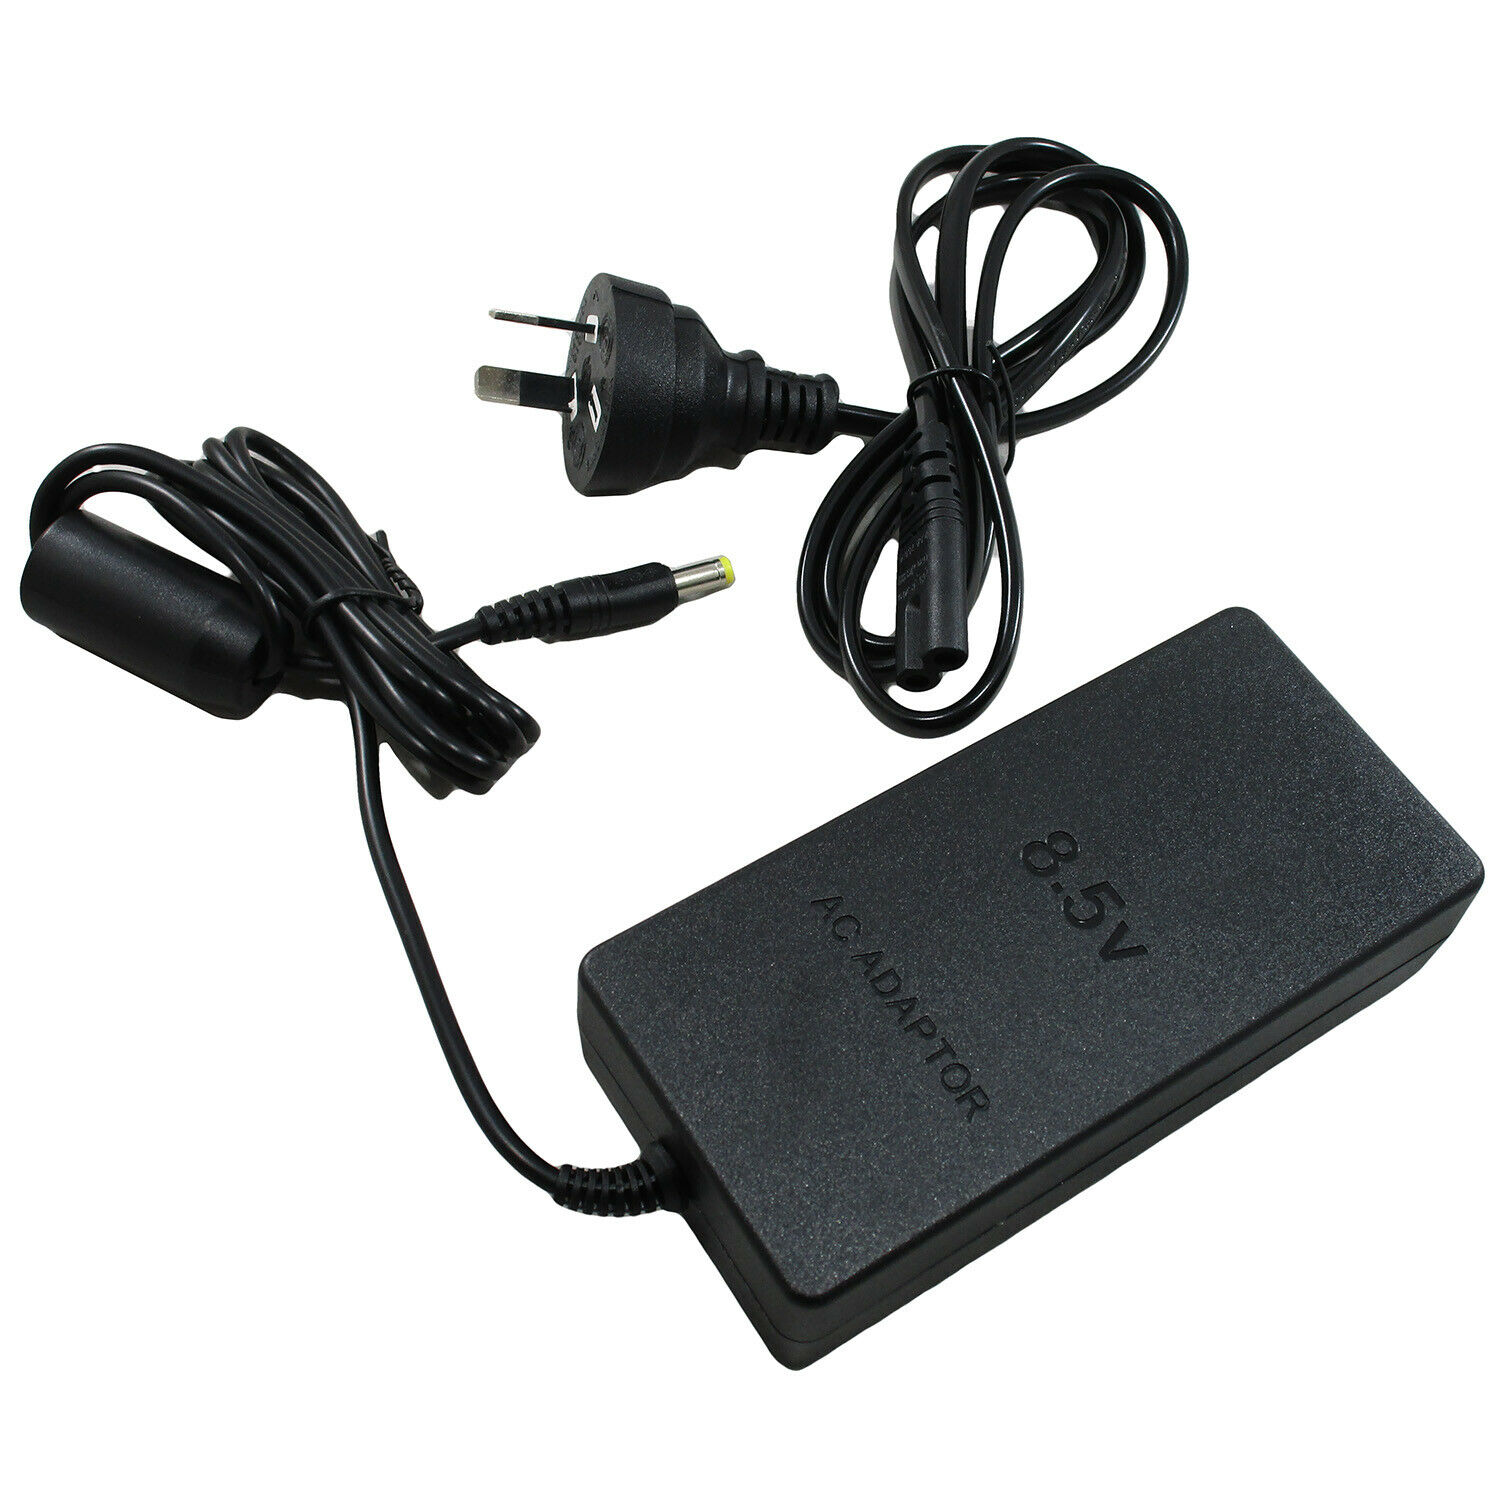 AC POWER SUPPLY/CABLE - for Slimline/Slim Playstation 2 PS2 Model: PlayStation 2 - Slim Colour: Black Country/Re